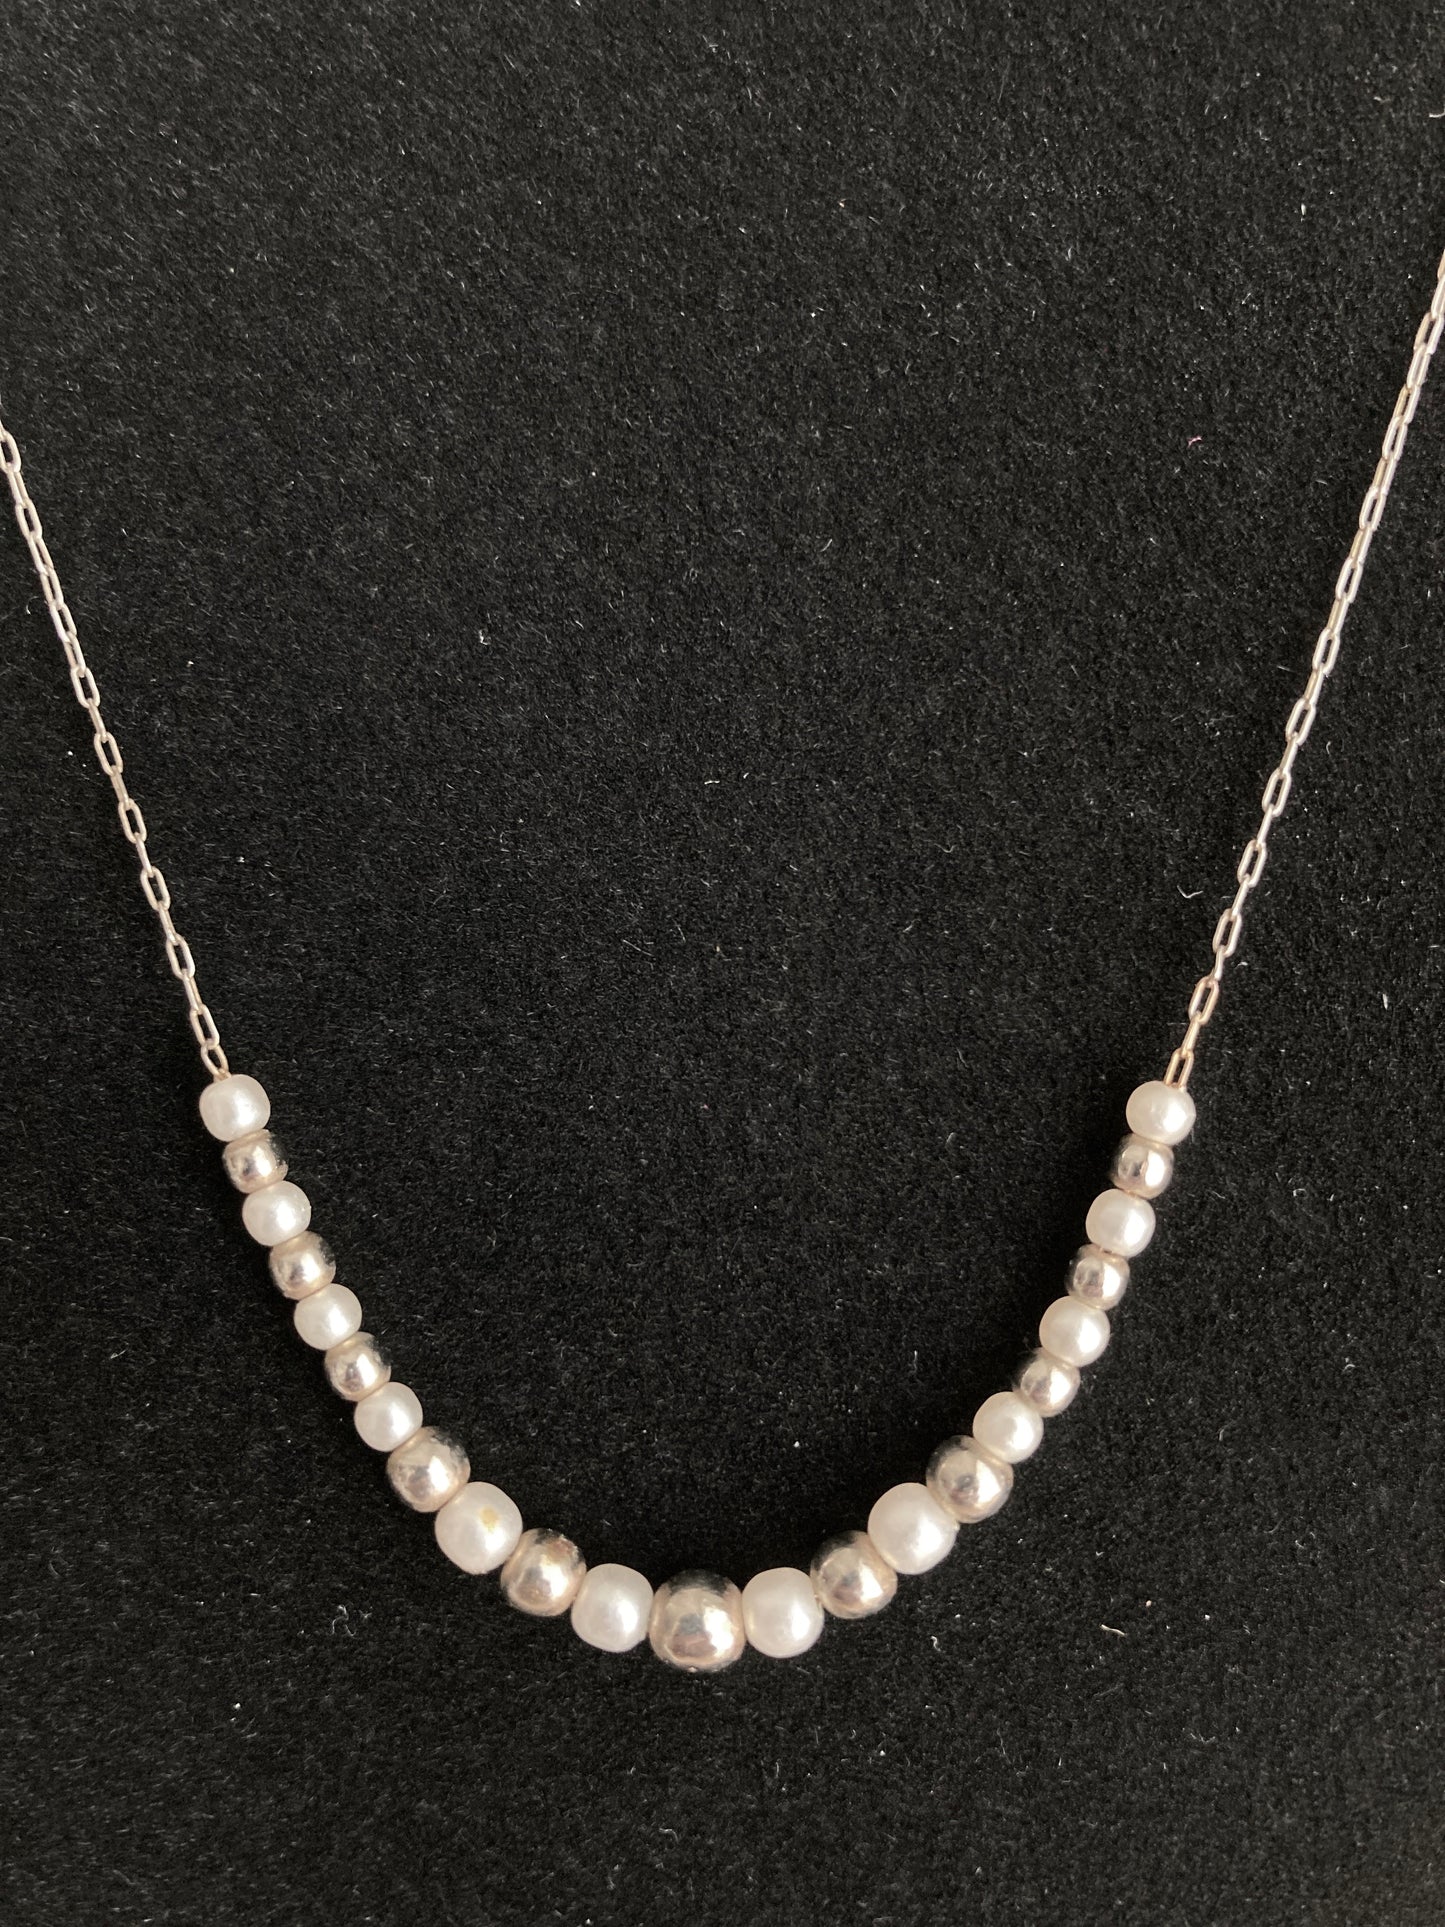 Graduated Floating Bead Choker Length Necklace Pearls and Silver